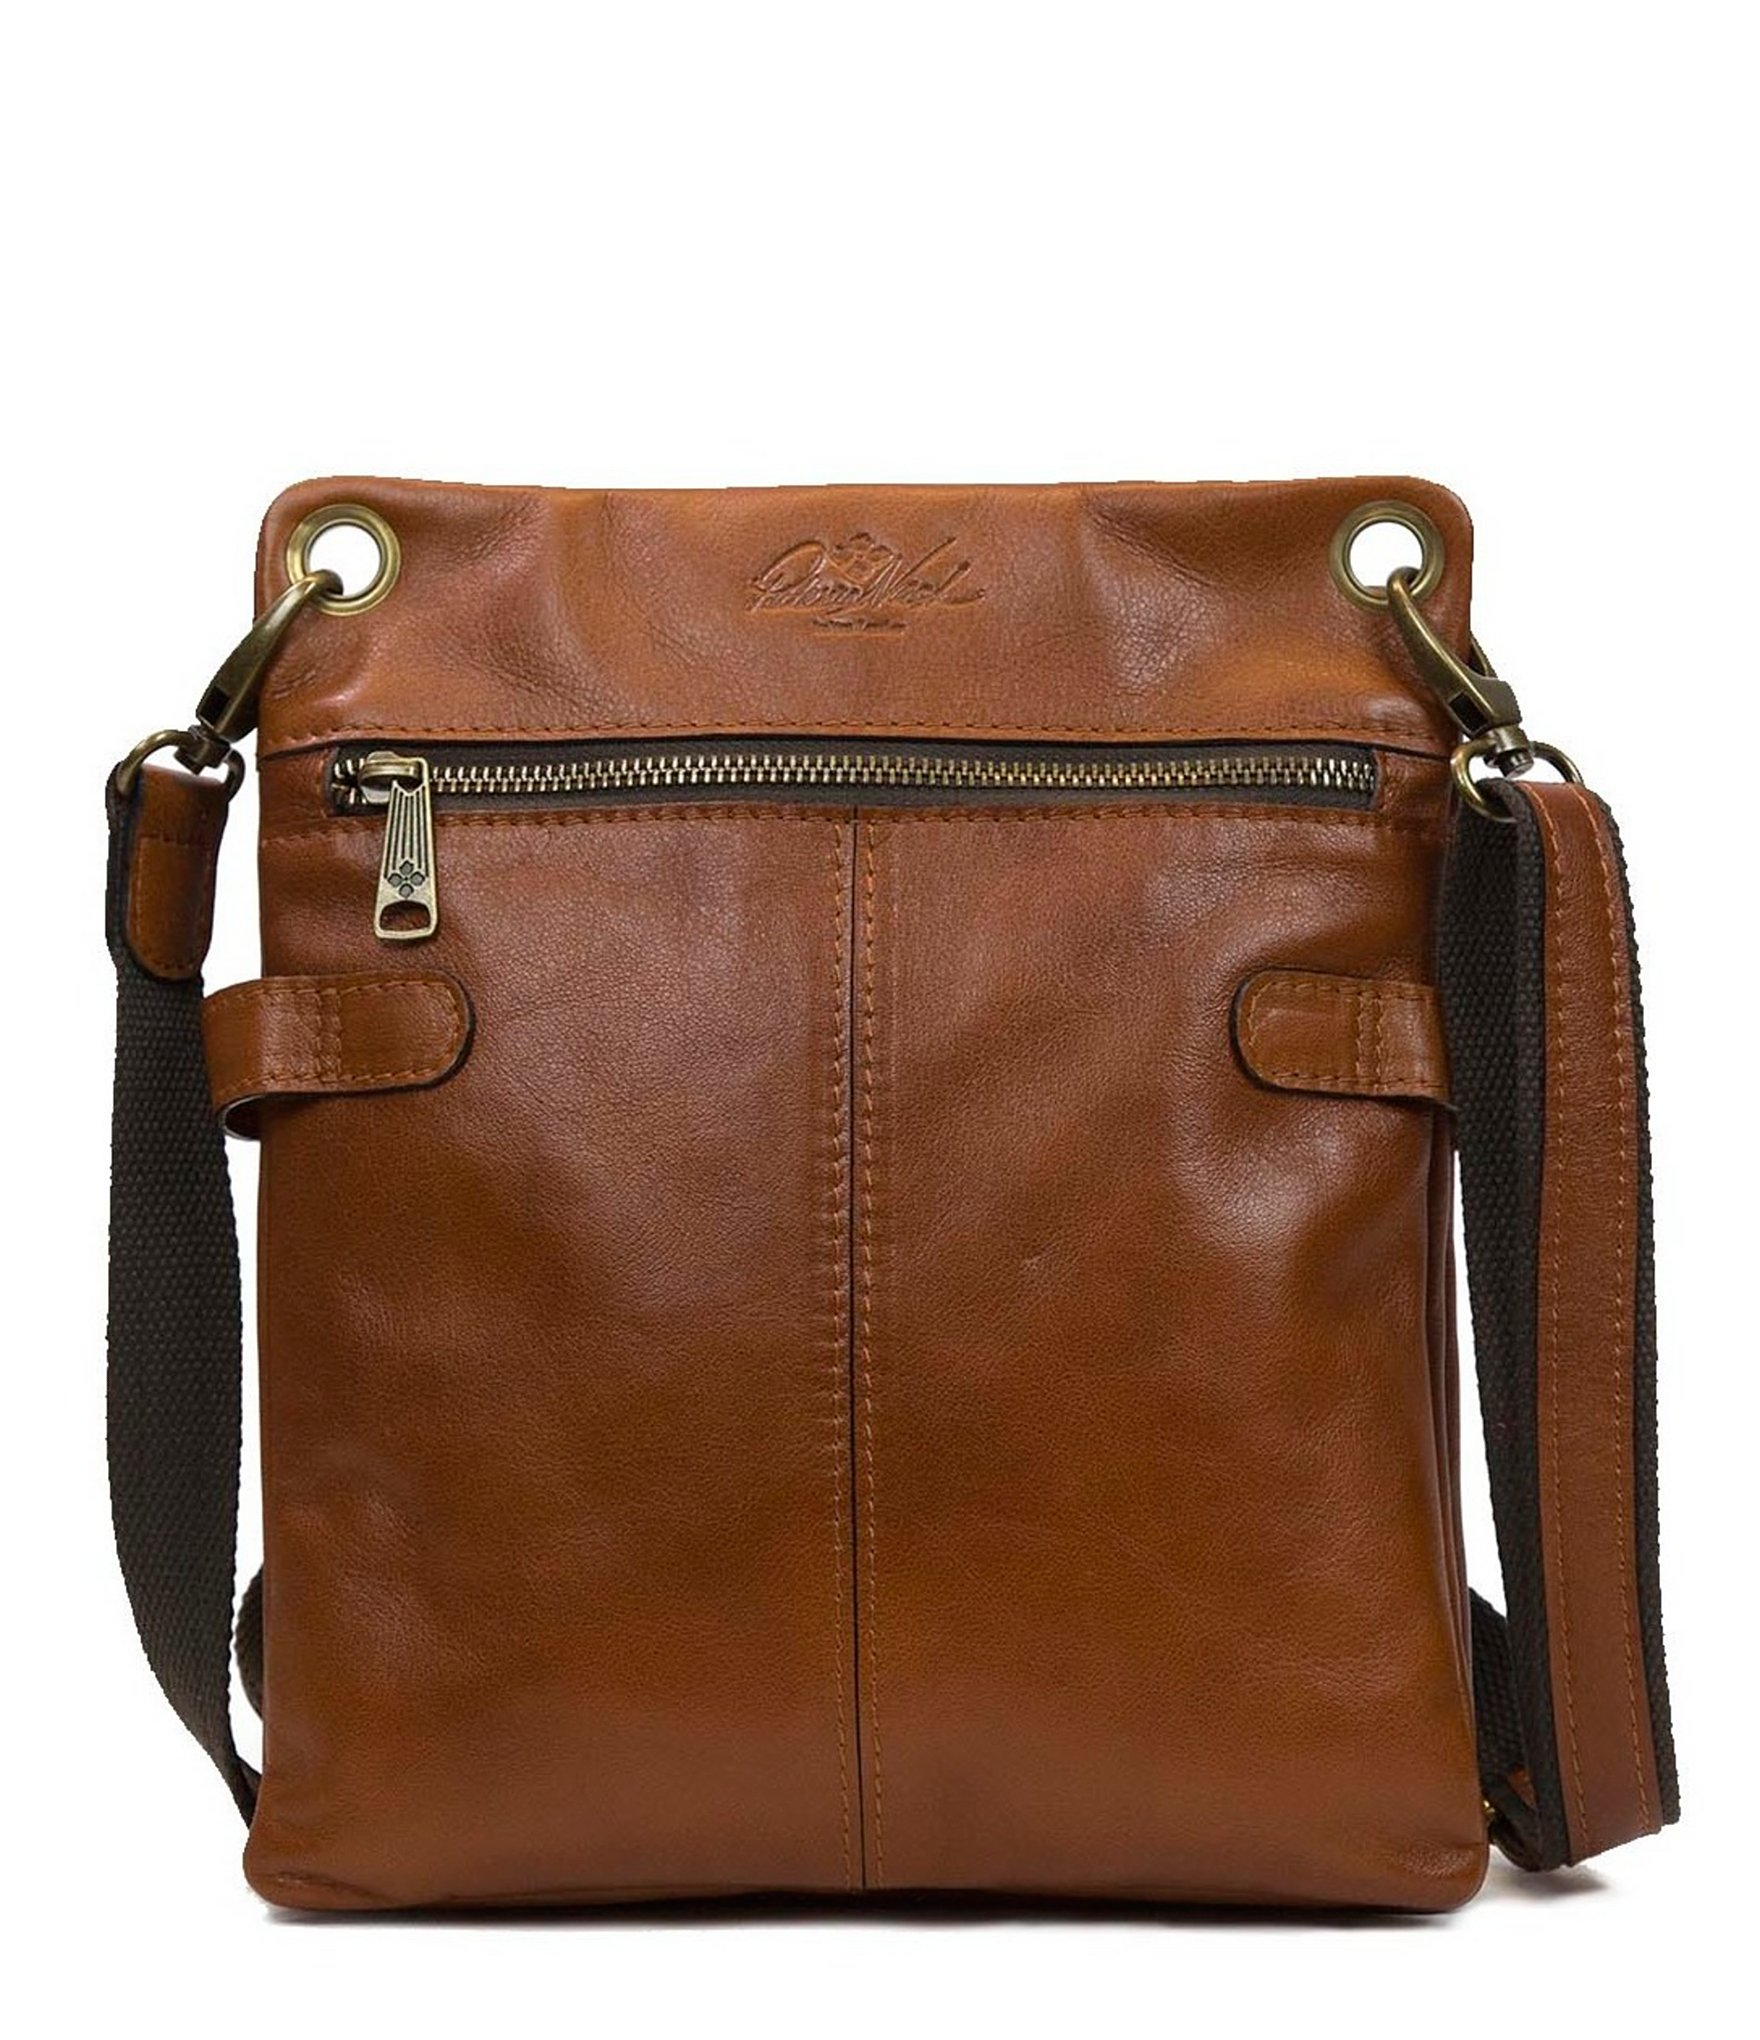 Lyst - Patricia Nash Soft Italian Leather Collection Francesca Organizer Cross-body Bag in Brown